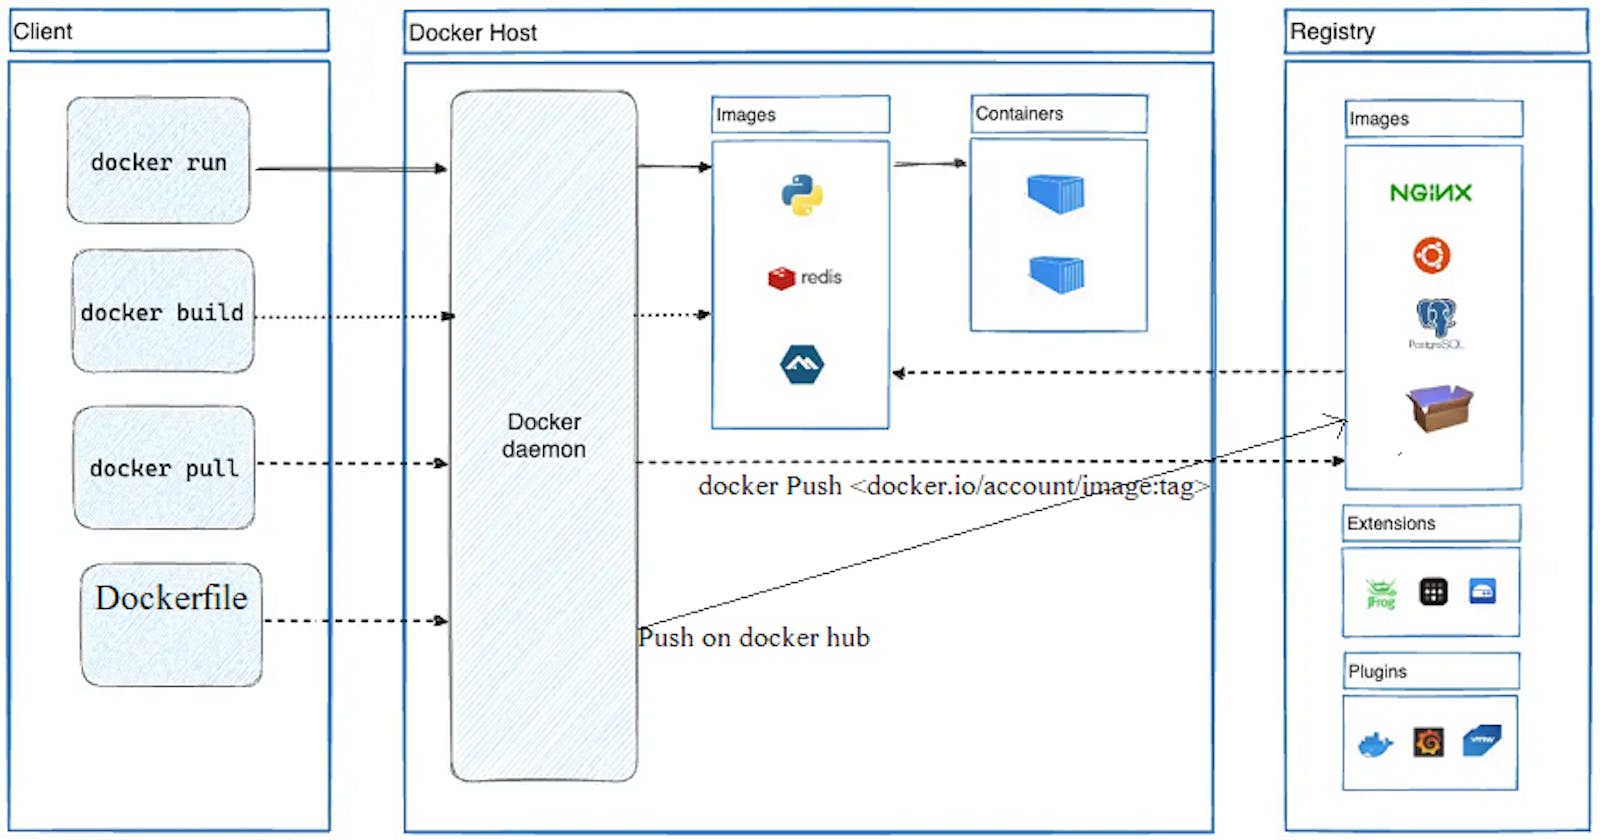 Mastering Docker: Deploying Web Servers and Testing with Ease - How to Build, Push, Pull, and Verify Docker Images for Web Server Deployment?.